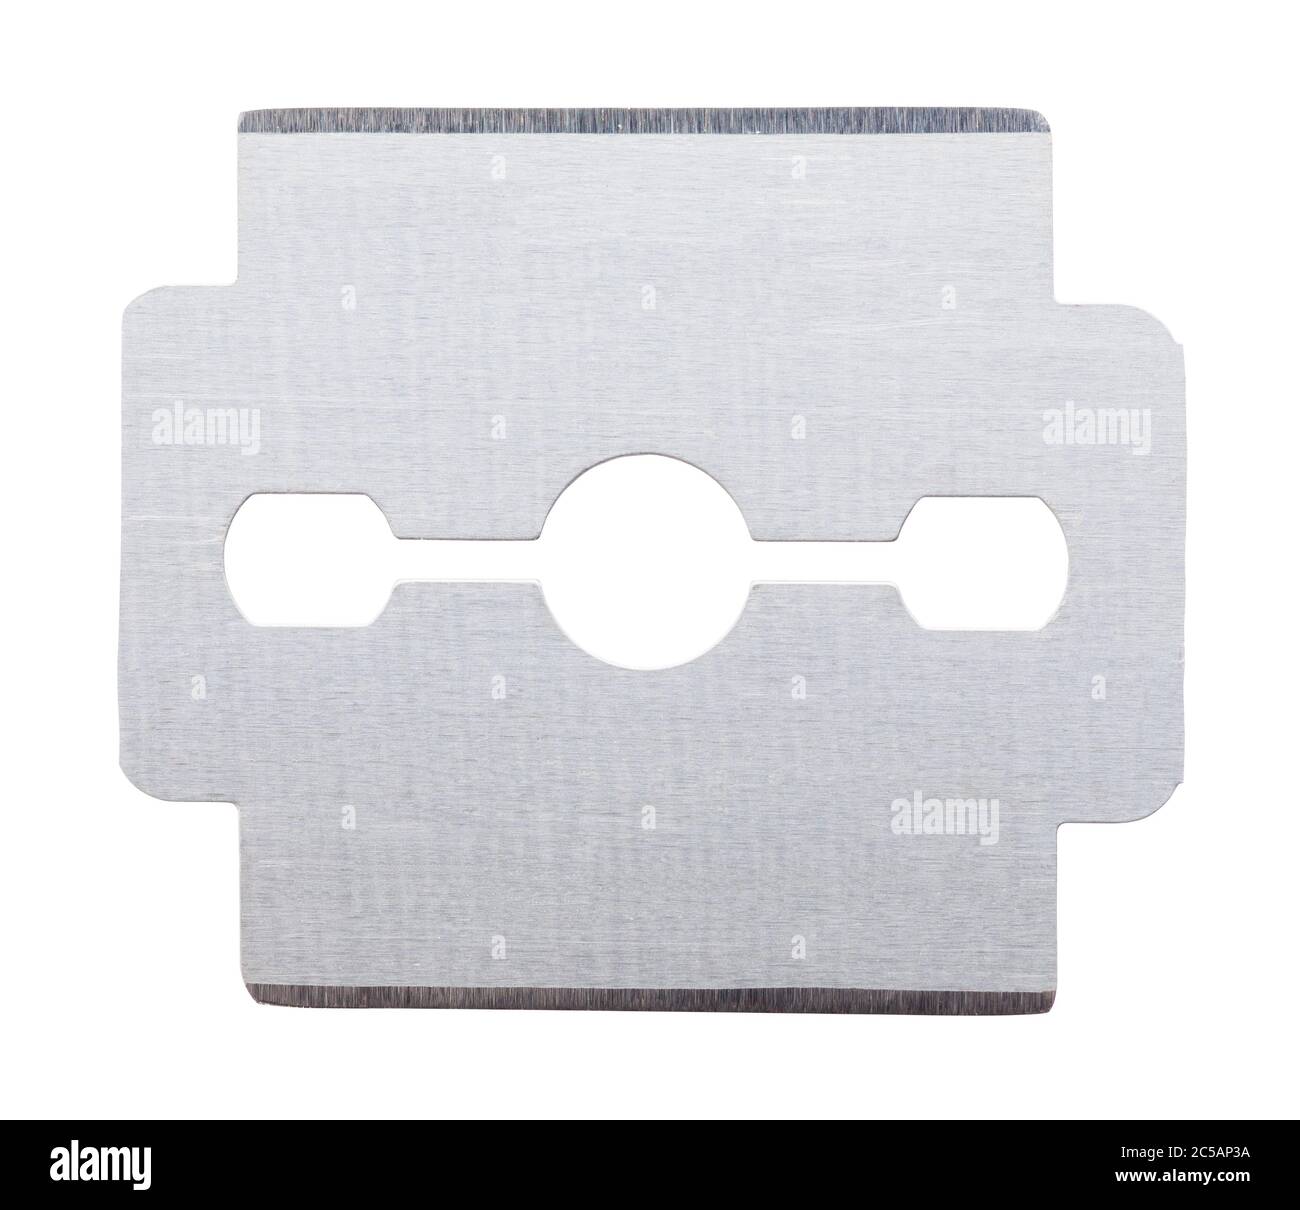 Steel Razor Blade Cut Out on White. Stock Photo